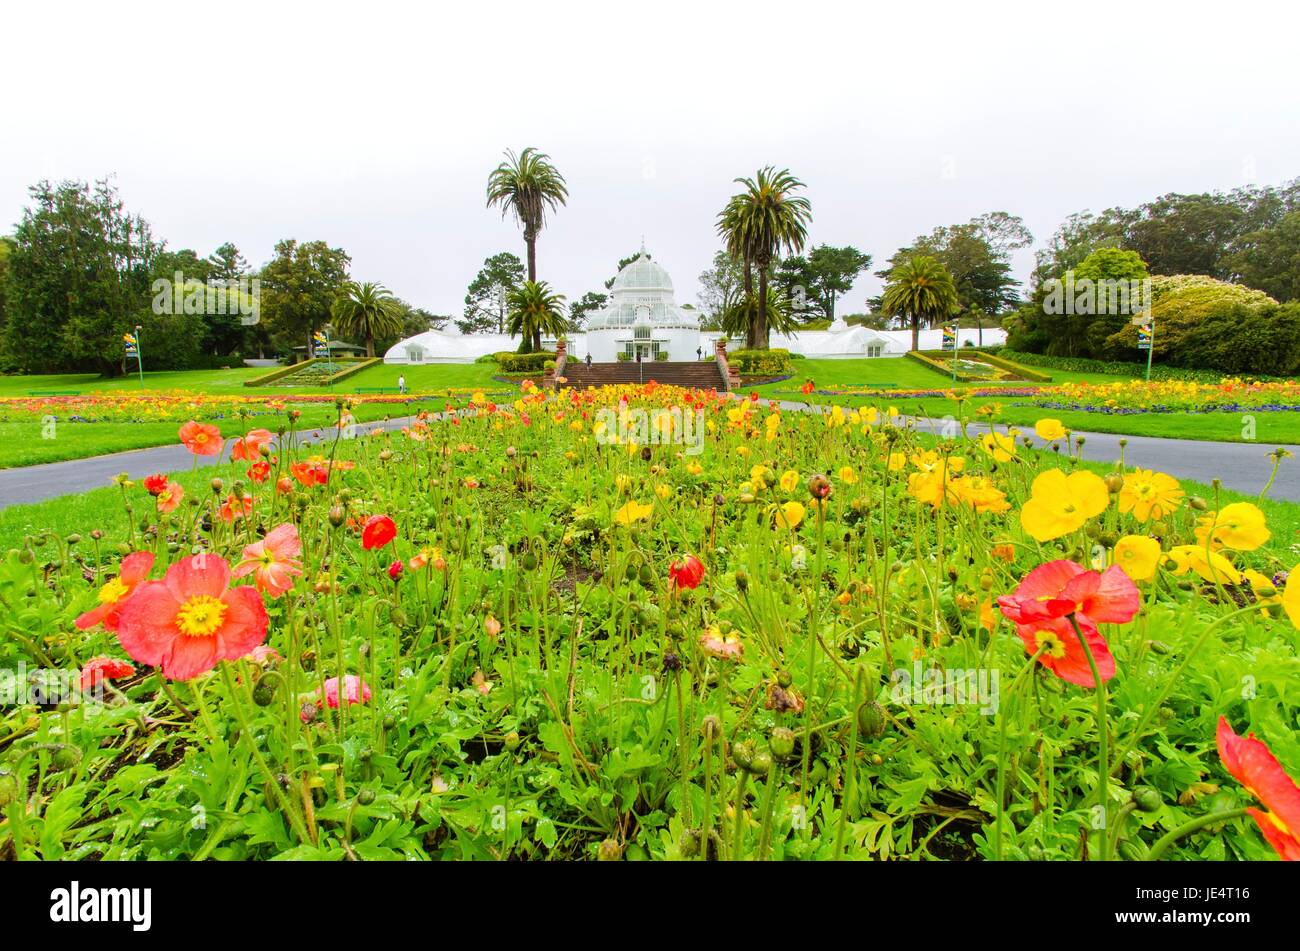 The garden of the Conservatory of flowers in San Francisco, California, United States of America. A greenhouse, botanical garden and historic landmark of traditional wooden Victorian architecture in Golden Gate park. Stock Photo